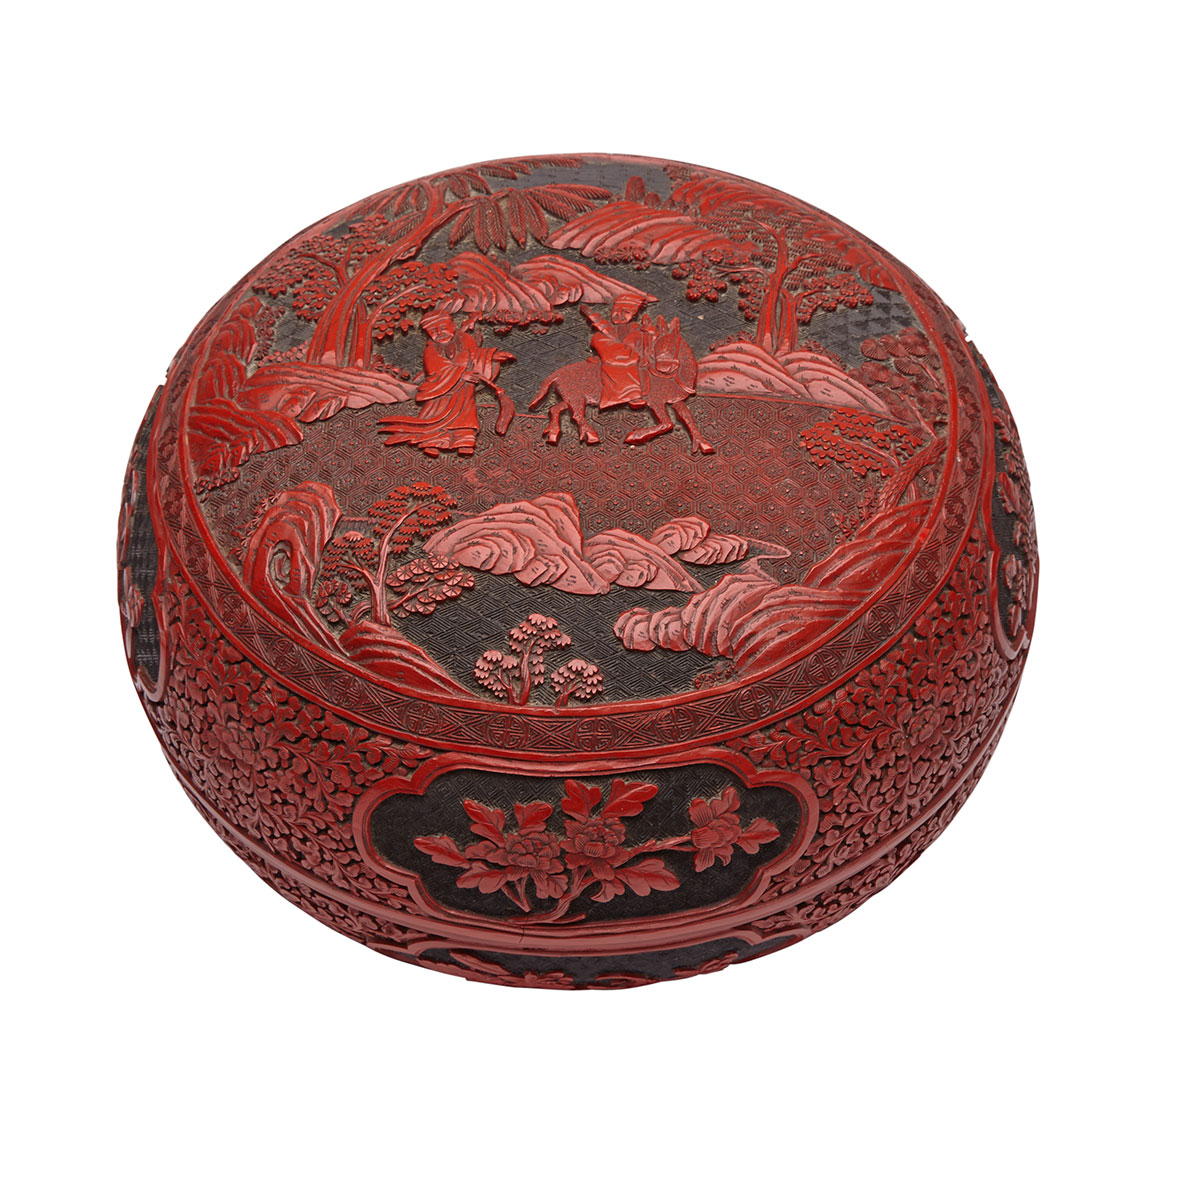 Large Cinnabar Lacquer Carved ‘Daoist’ Box and Cover, 19th Century